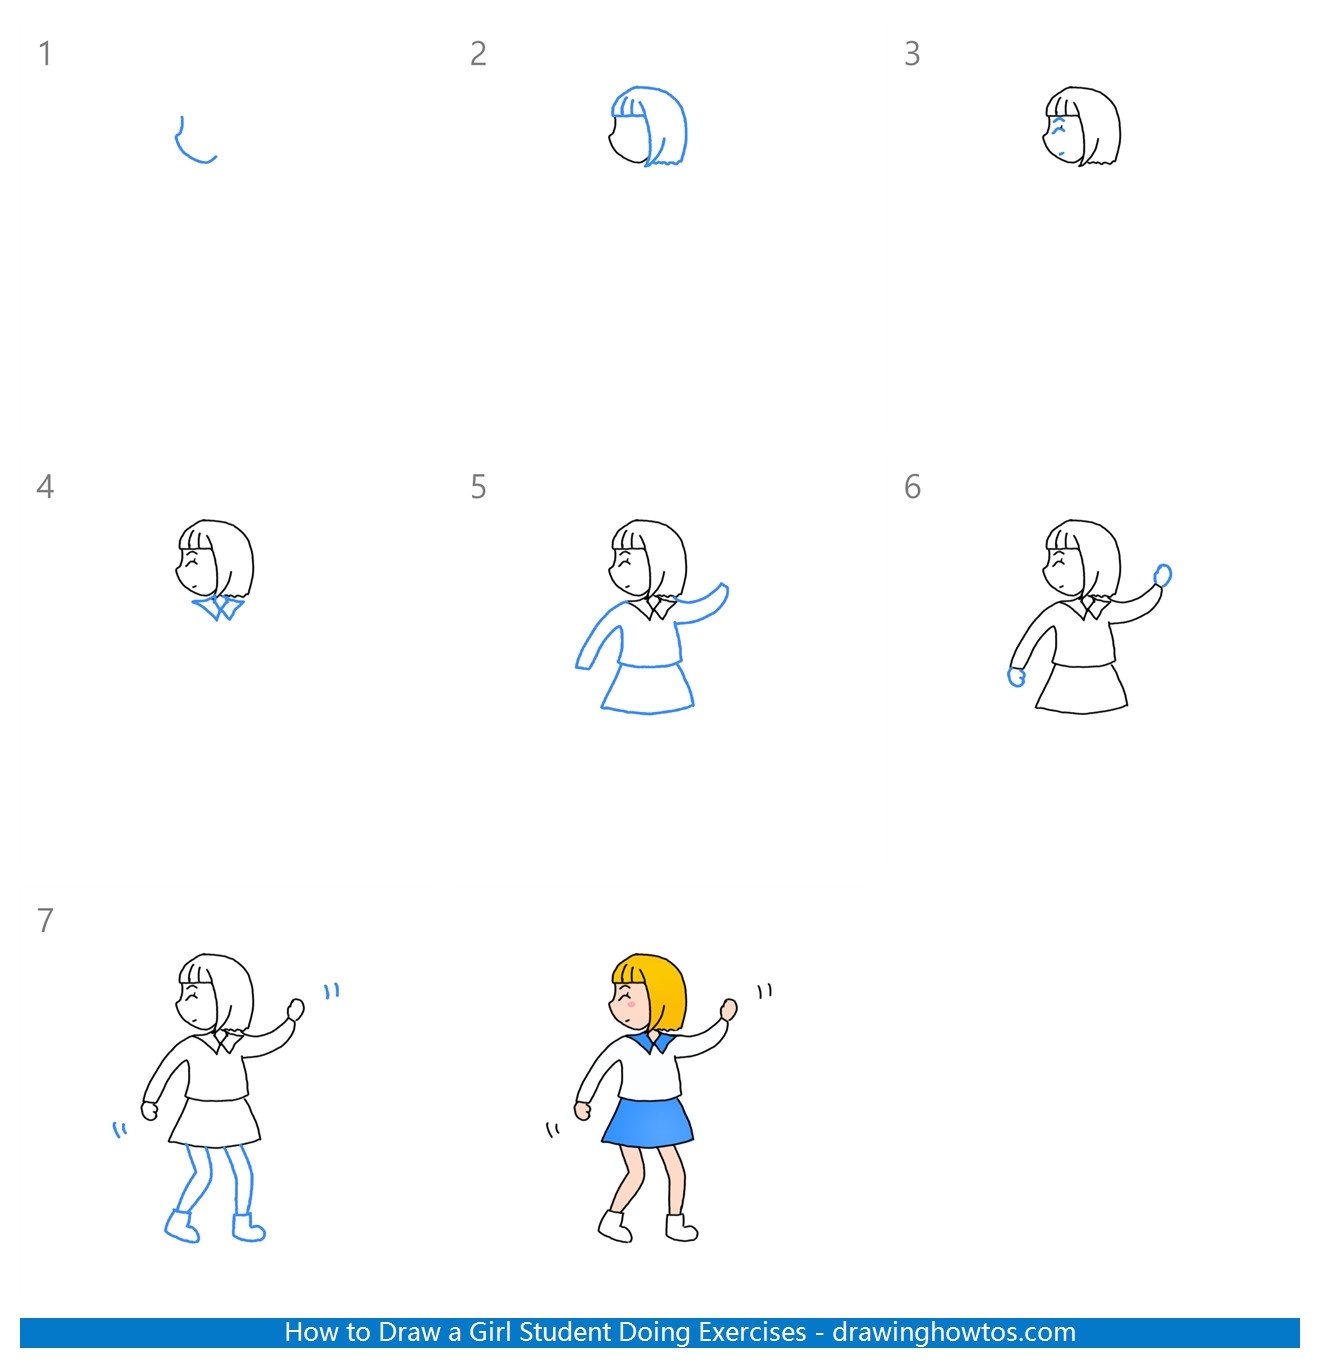 How to Draw a Girl Student Doing Exercises Step by Step